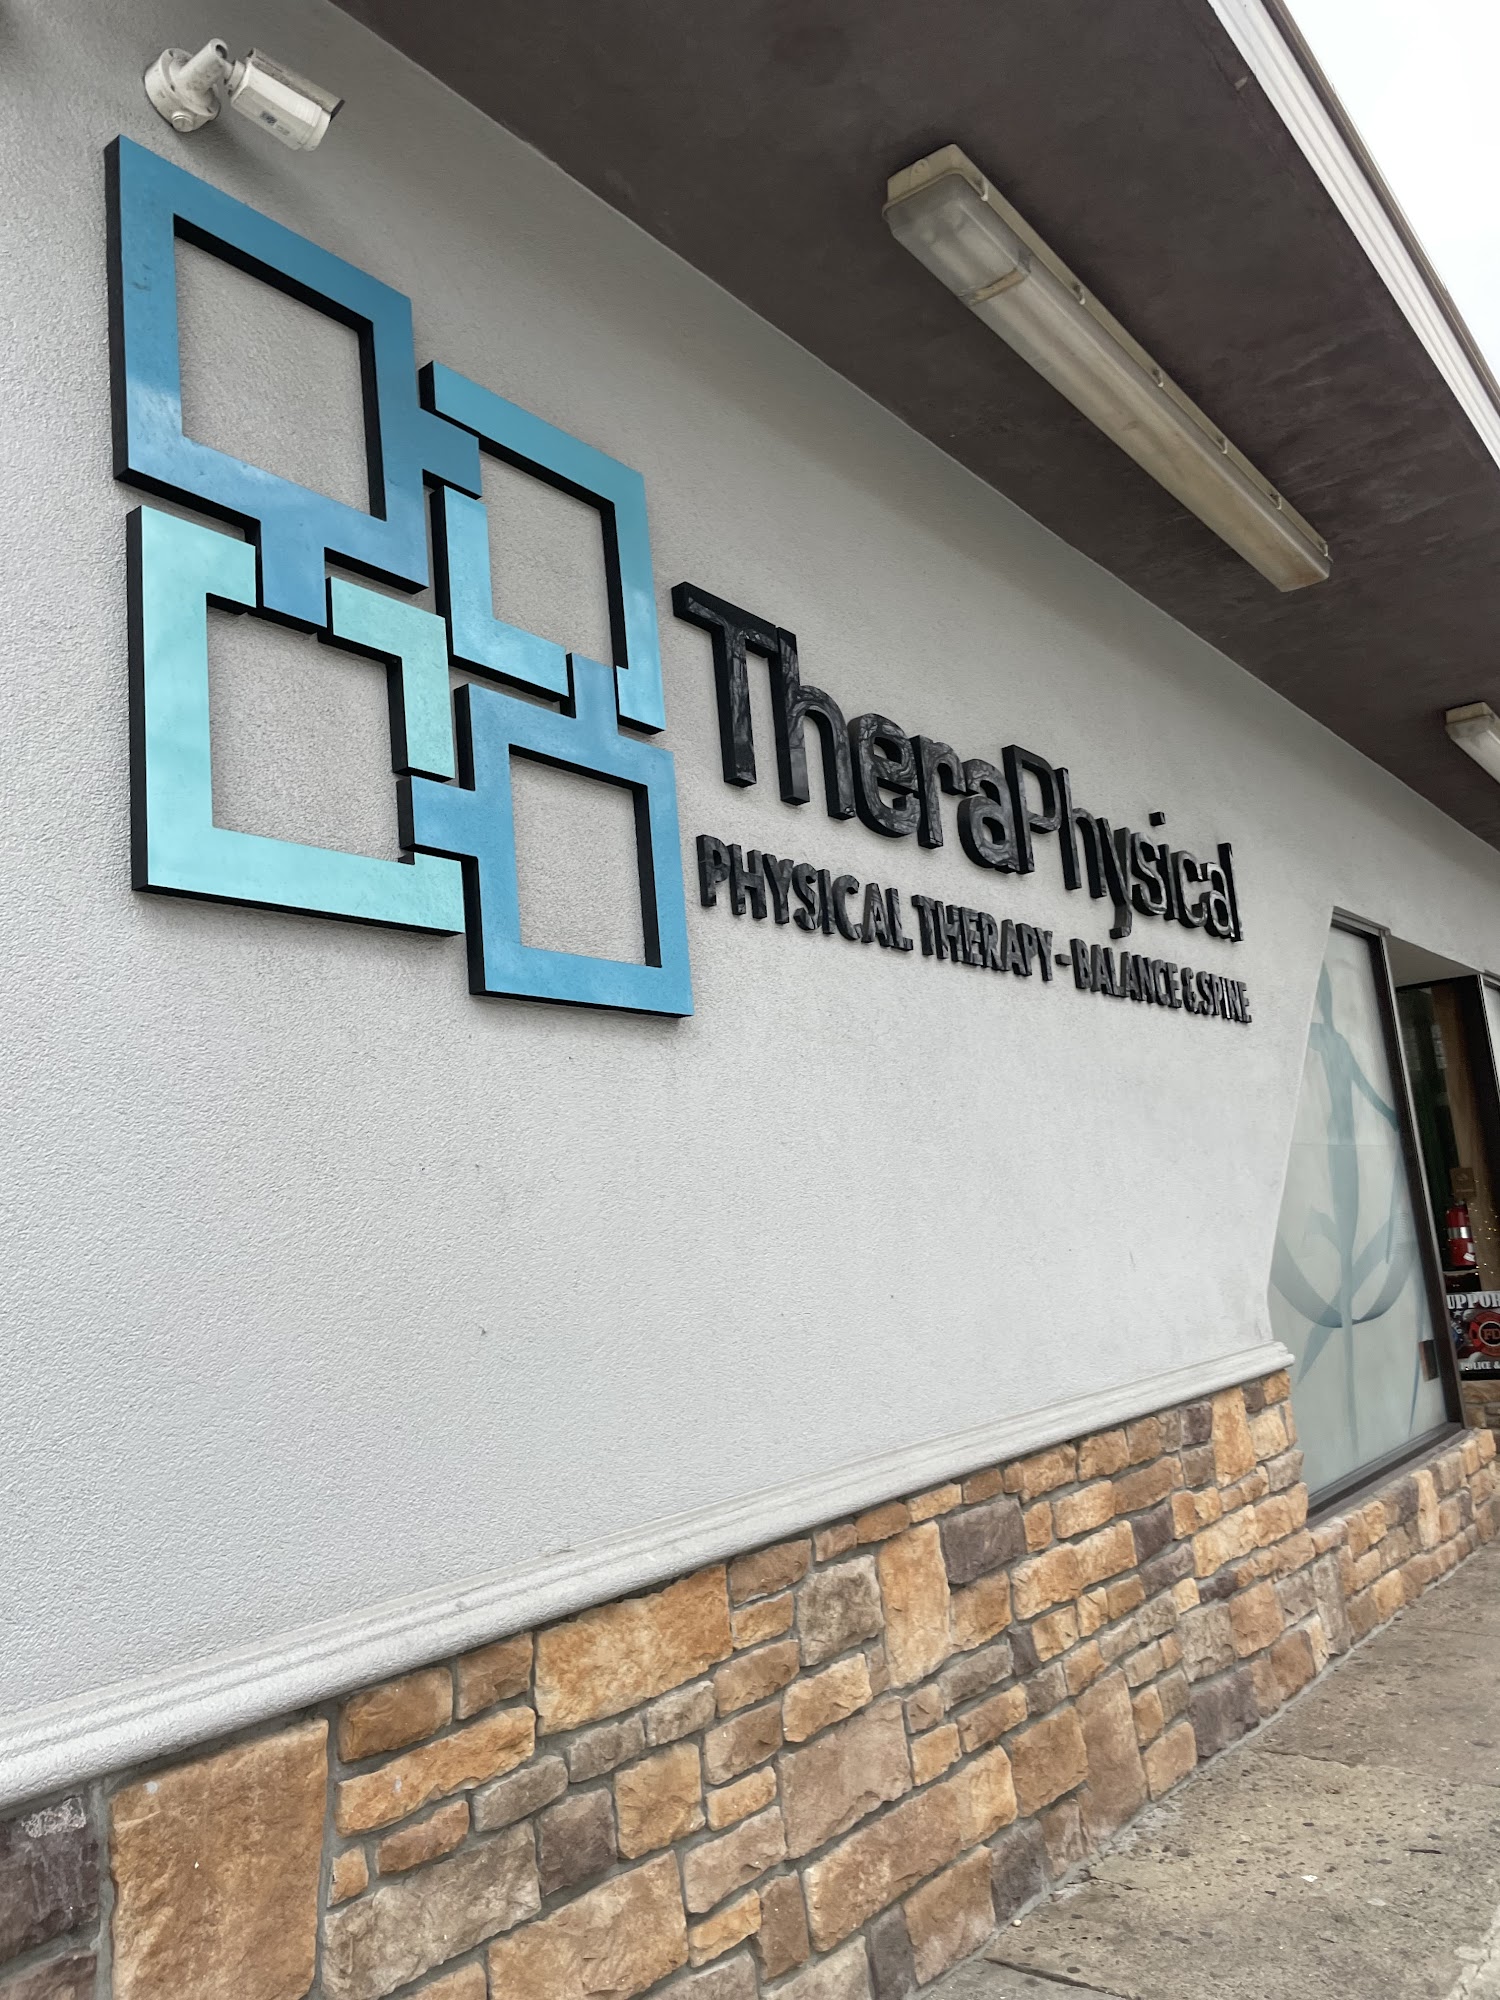 TheraPhysical